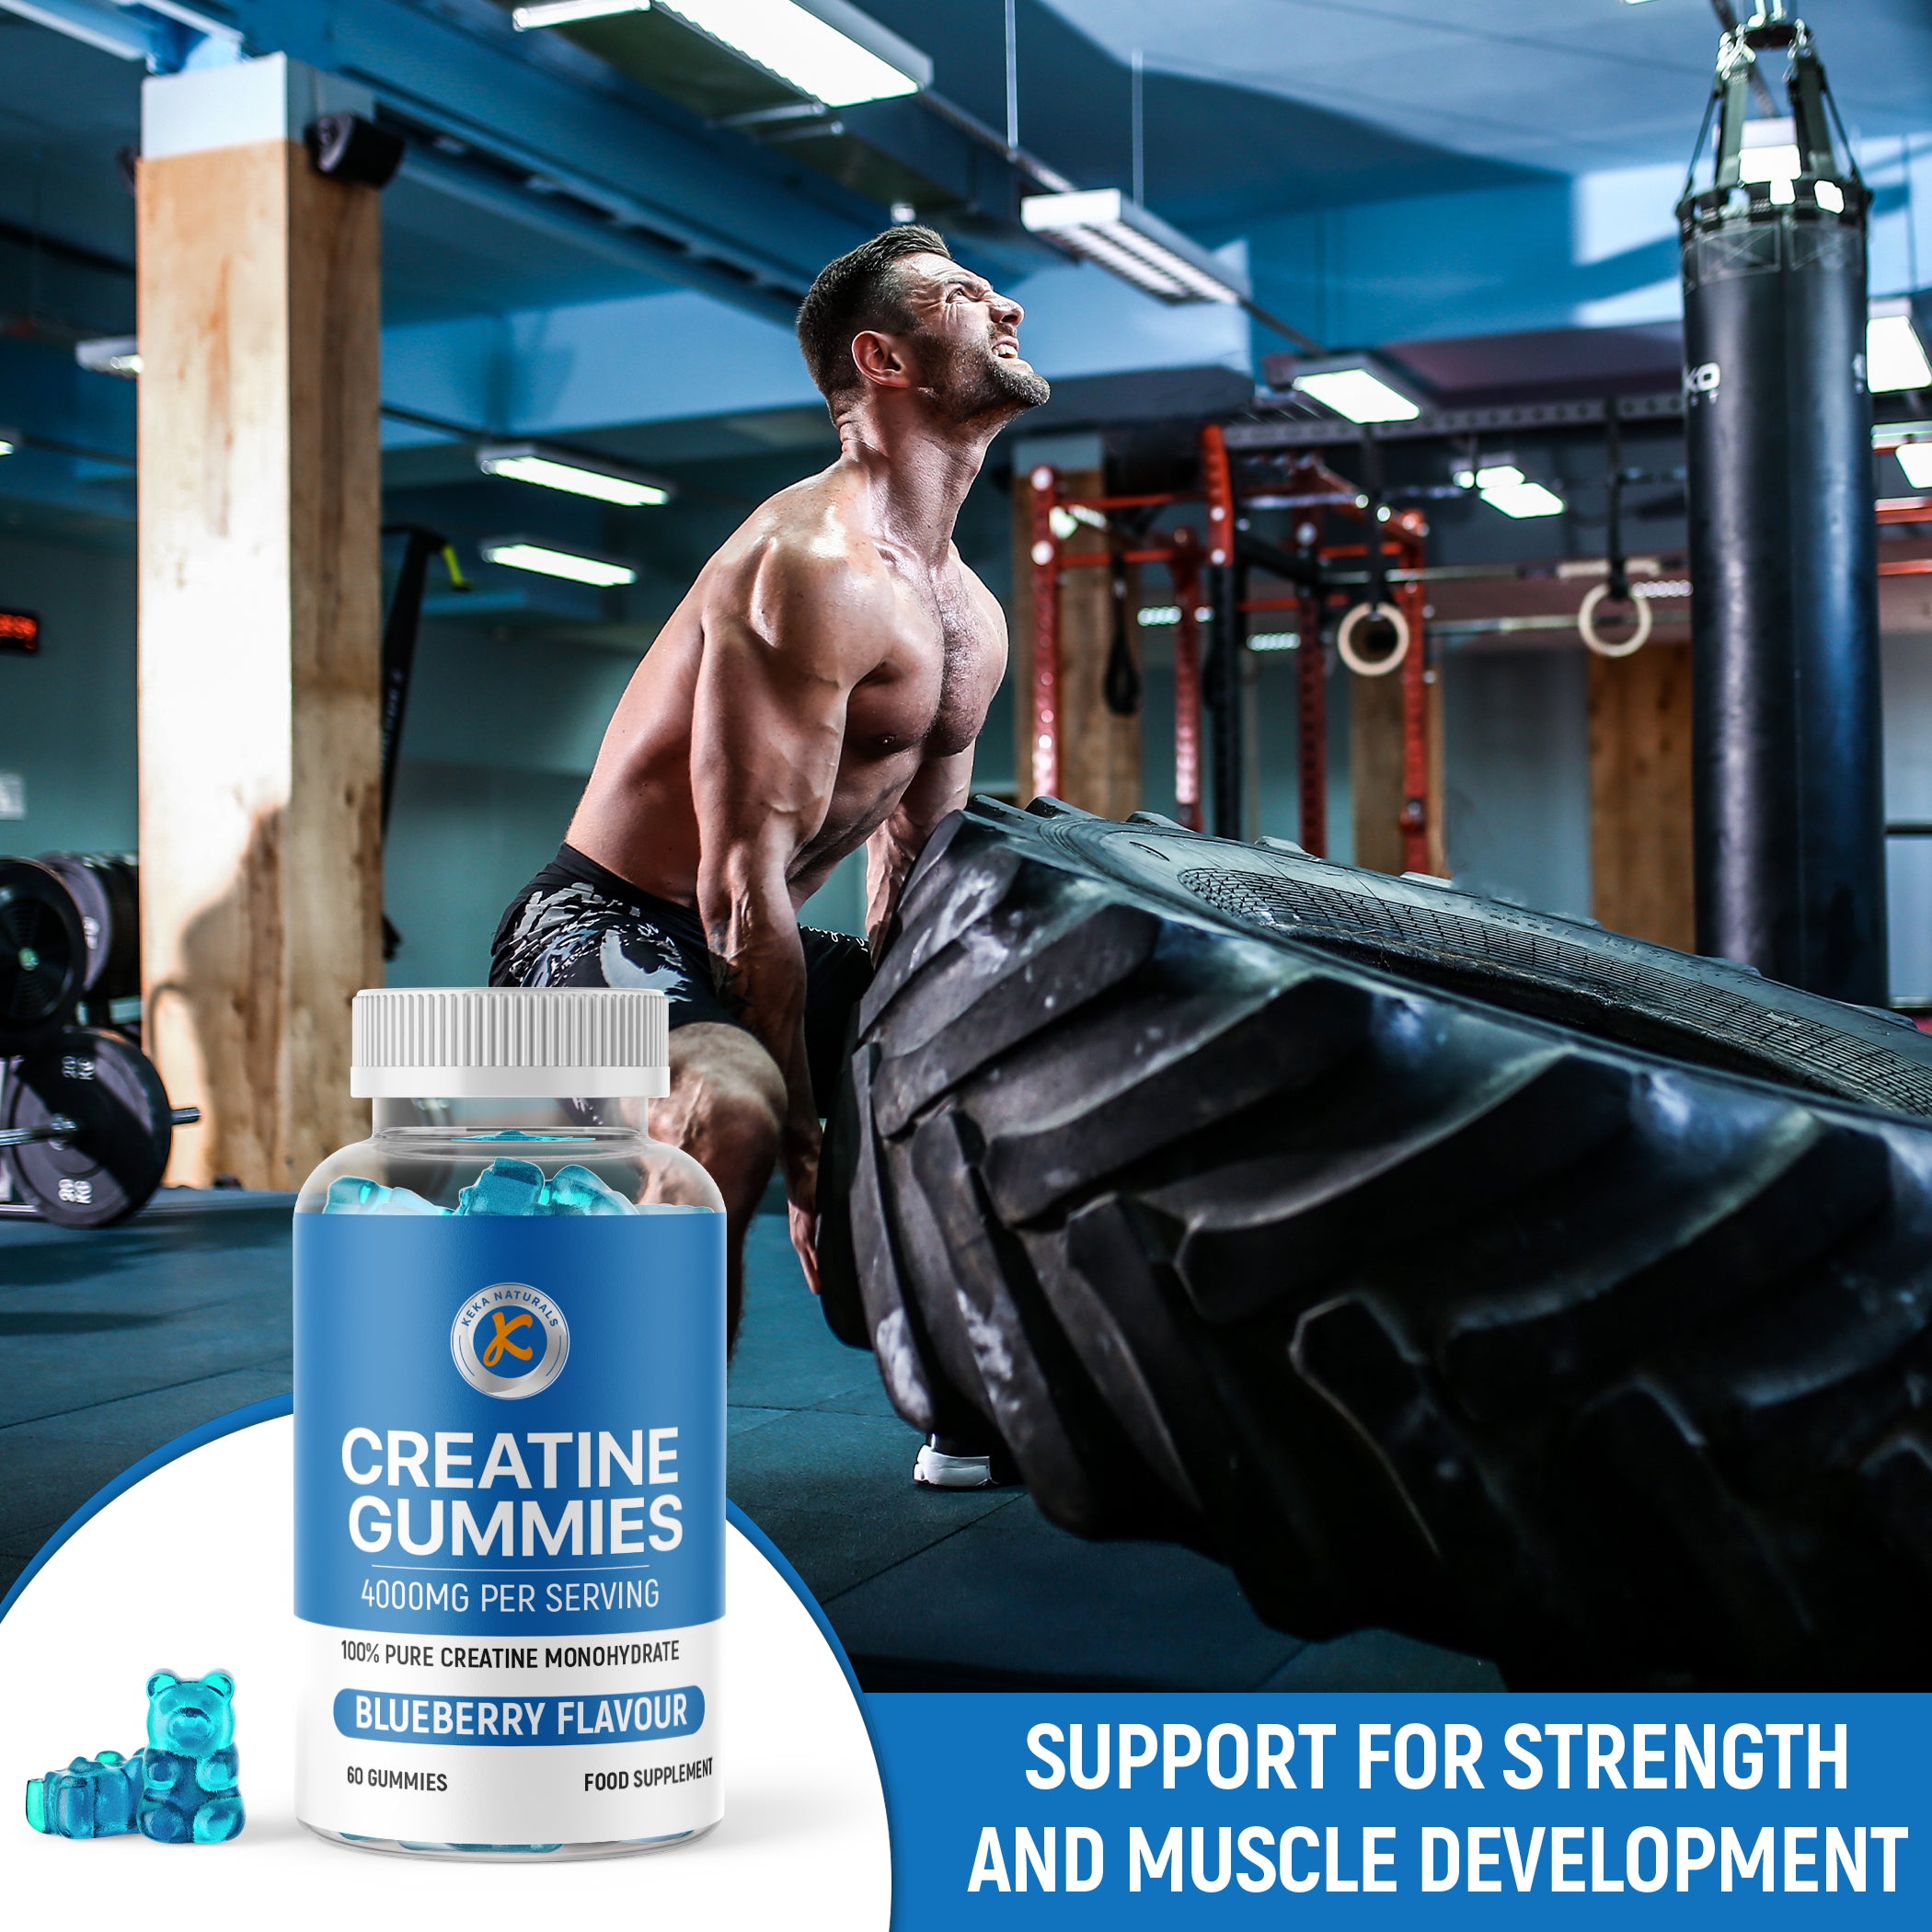 creatine gummies 4000mg per serving blueberry flavour to support strength and muscle development